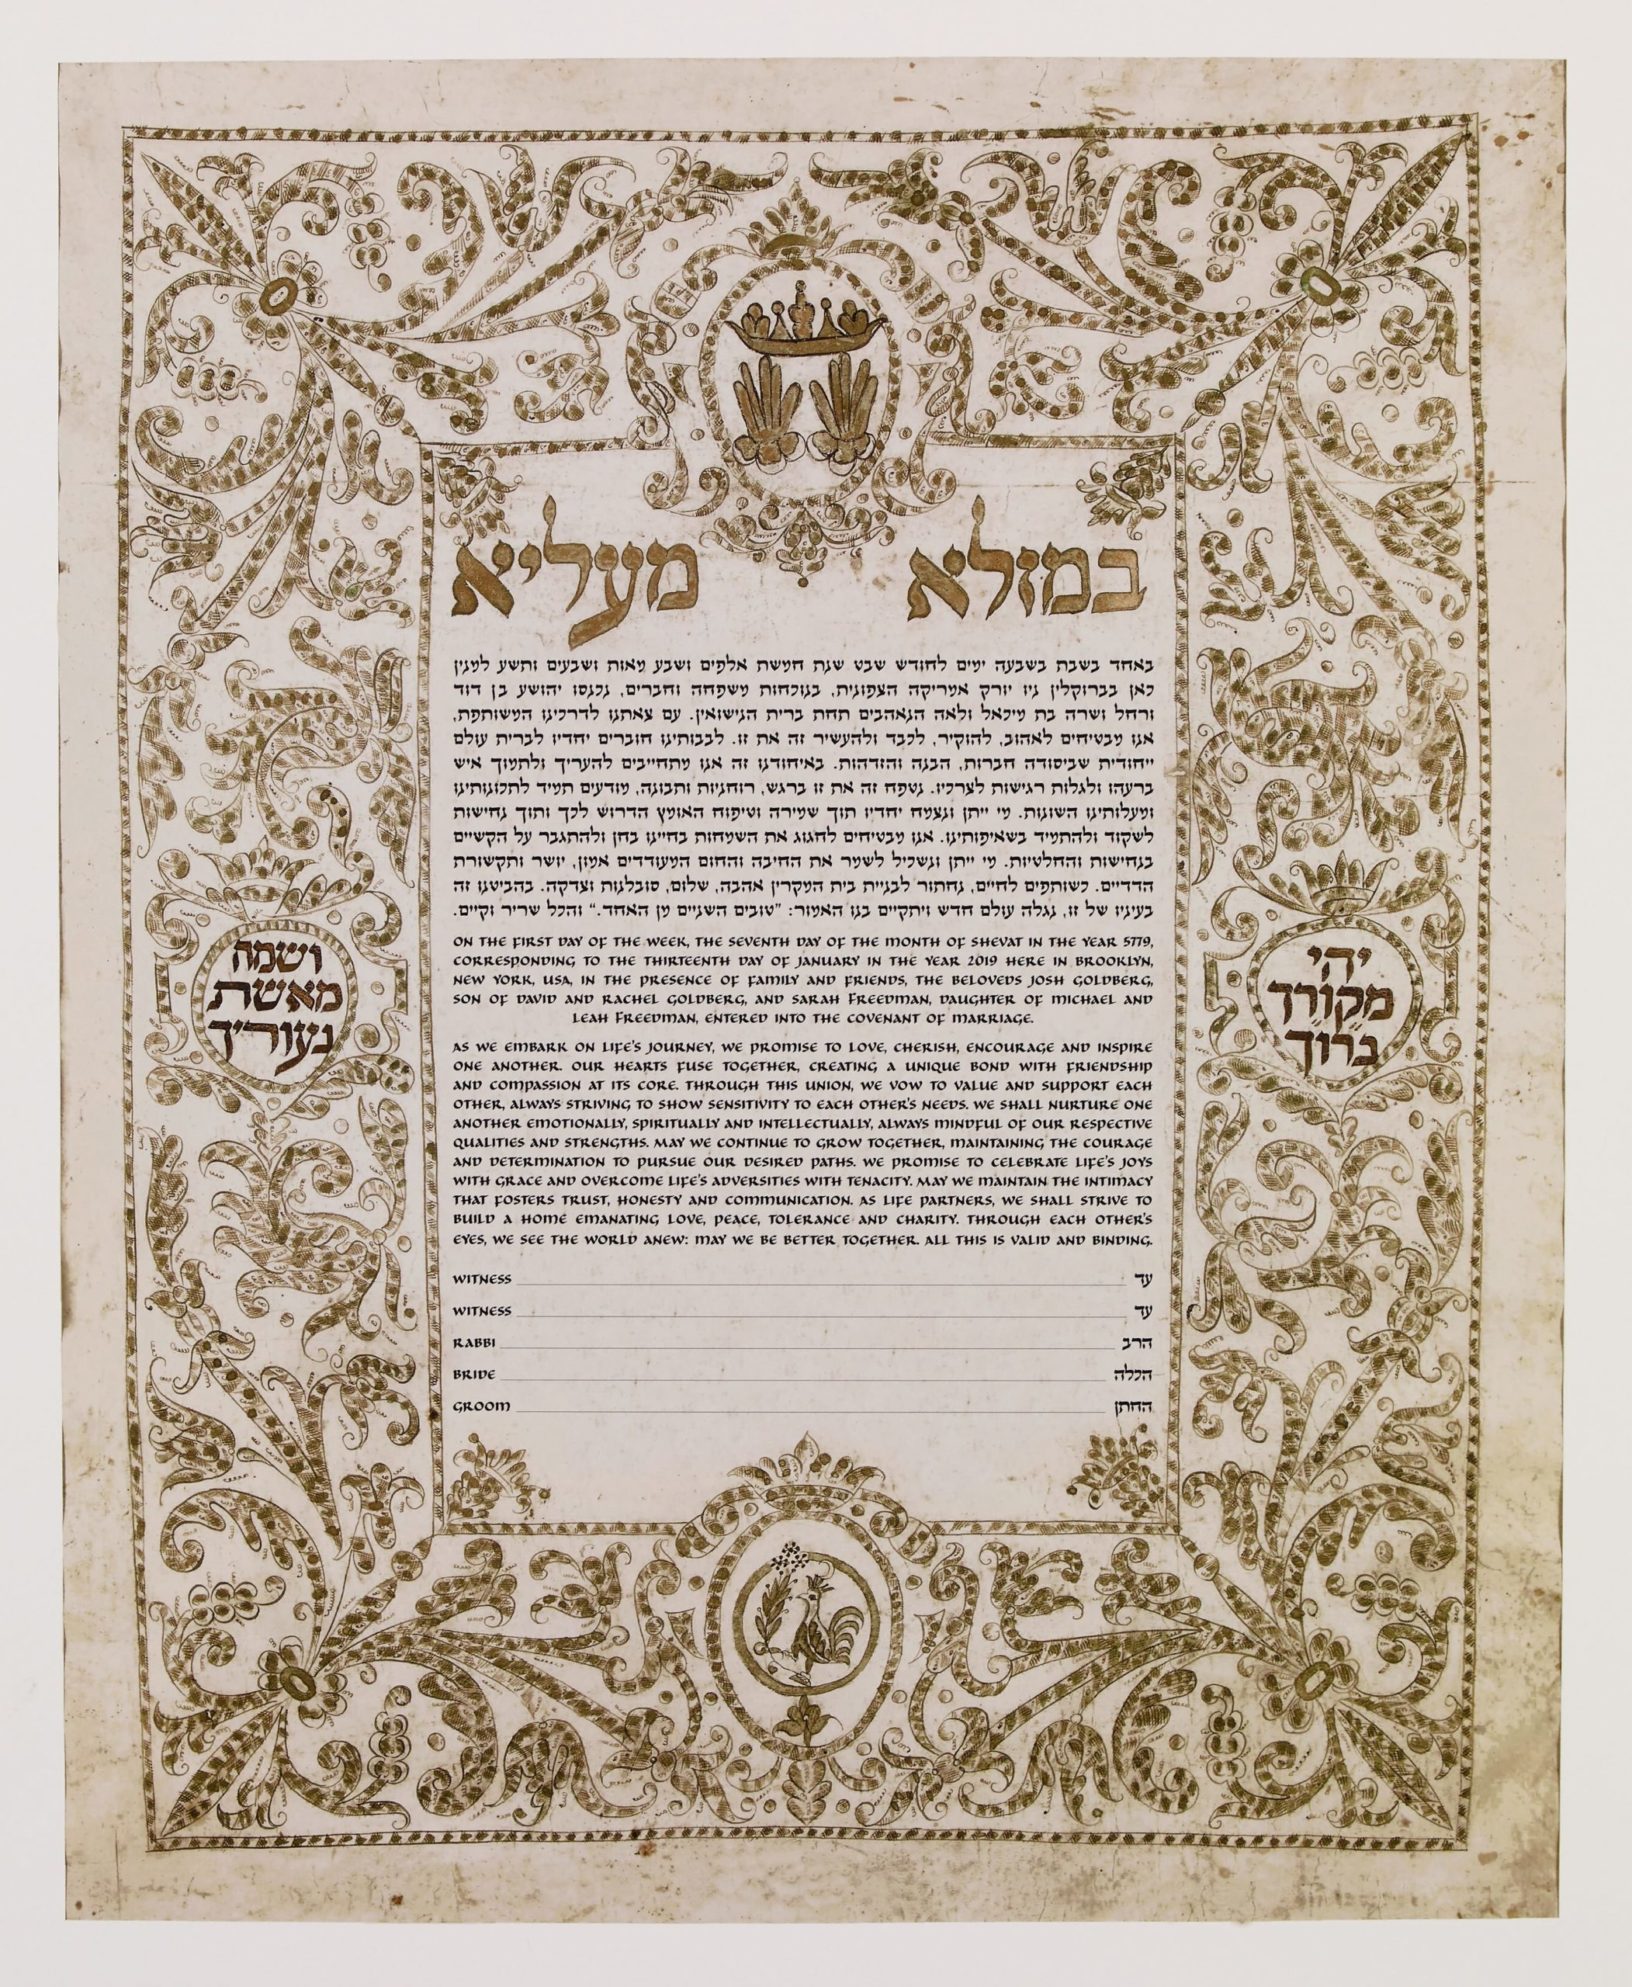 Monselice, Italy, 1659 Ketubah Store by The Jewish Museum